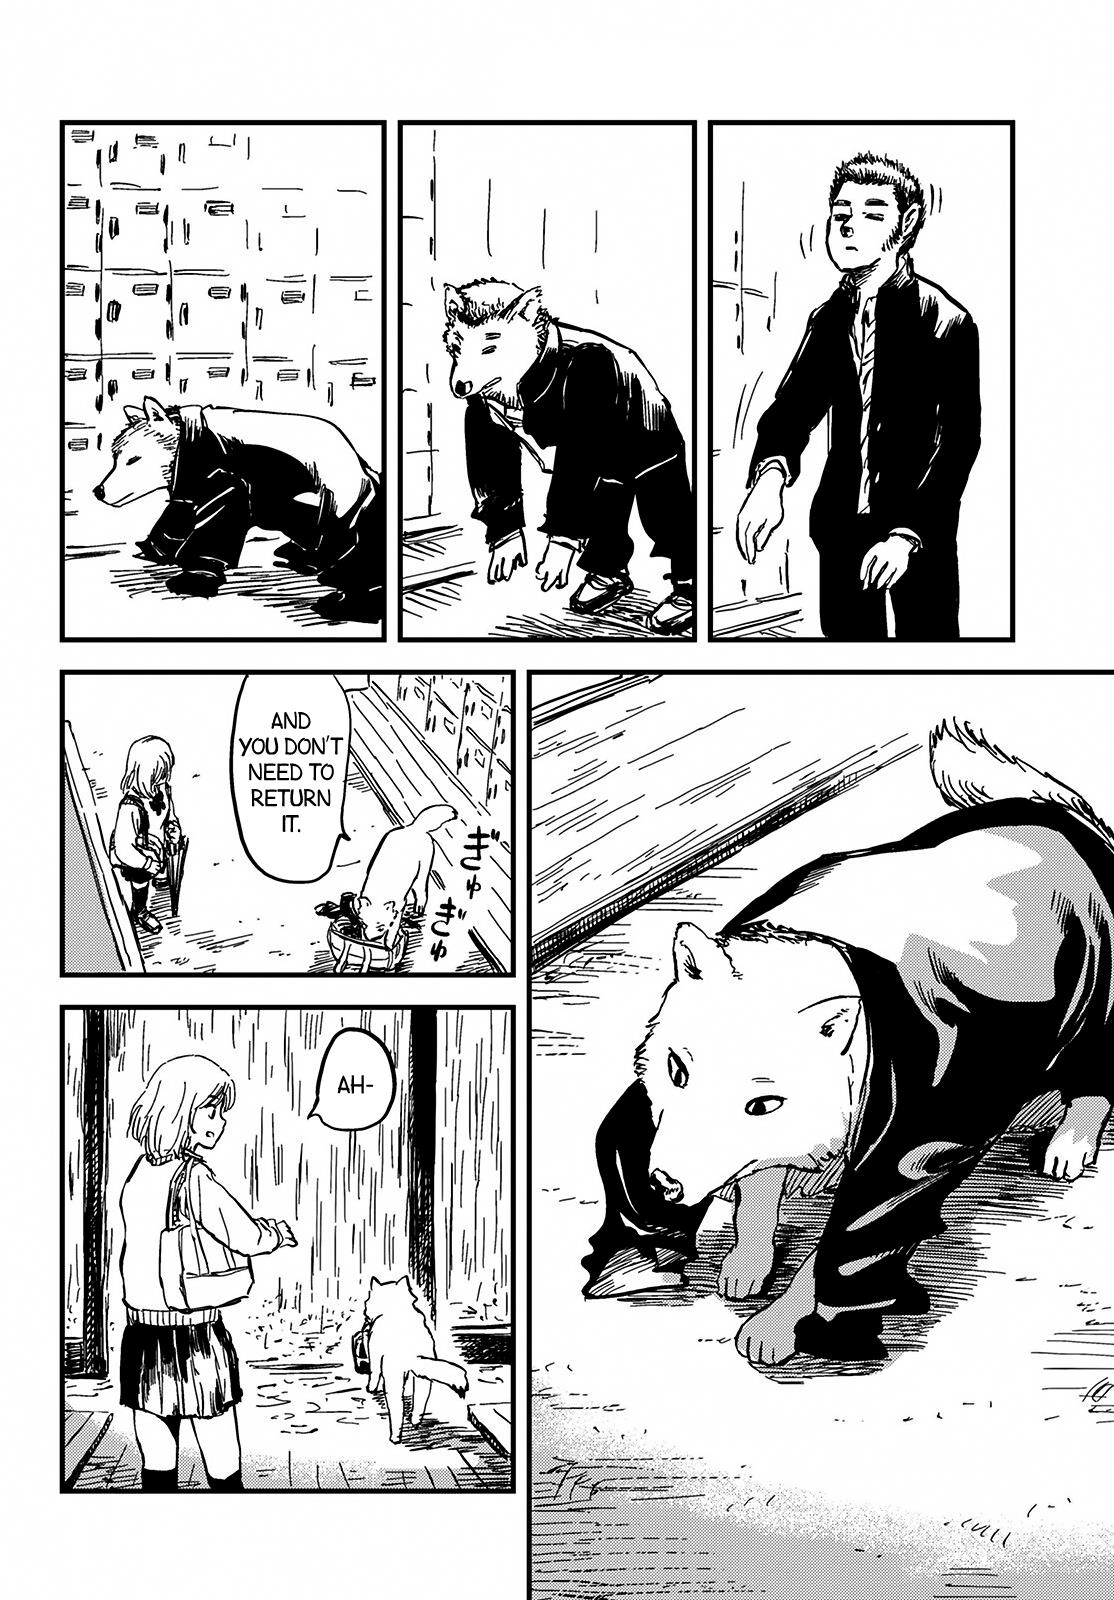 The People Of The Rising Moon City Vol.1 Chapter 2: The Invisible Girl And The Werewolf Boy - Picture 2